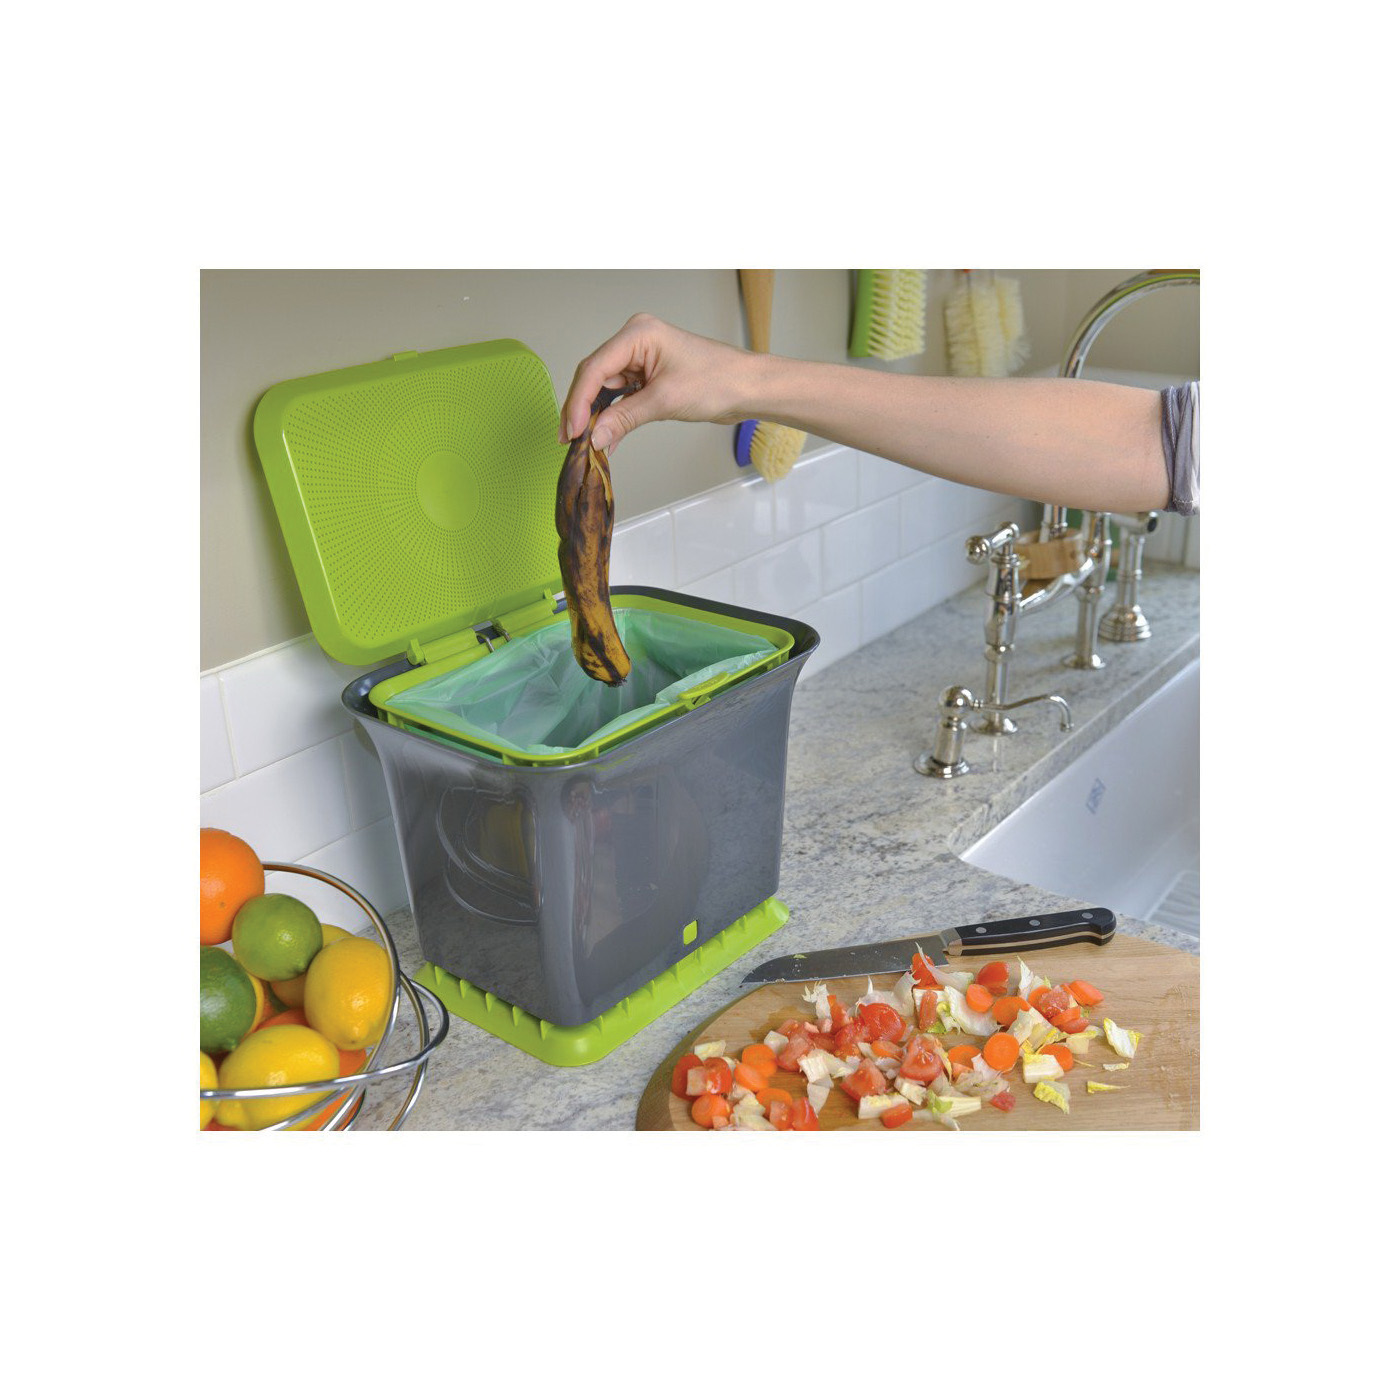 Full Circle FC11301-GS Compost Collector, 1.5 gal Capacity, Plastic/Steel, Green, 8-1/2 in W, 11.38 in D, 9 in H - 4